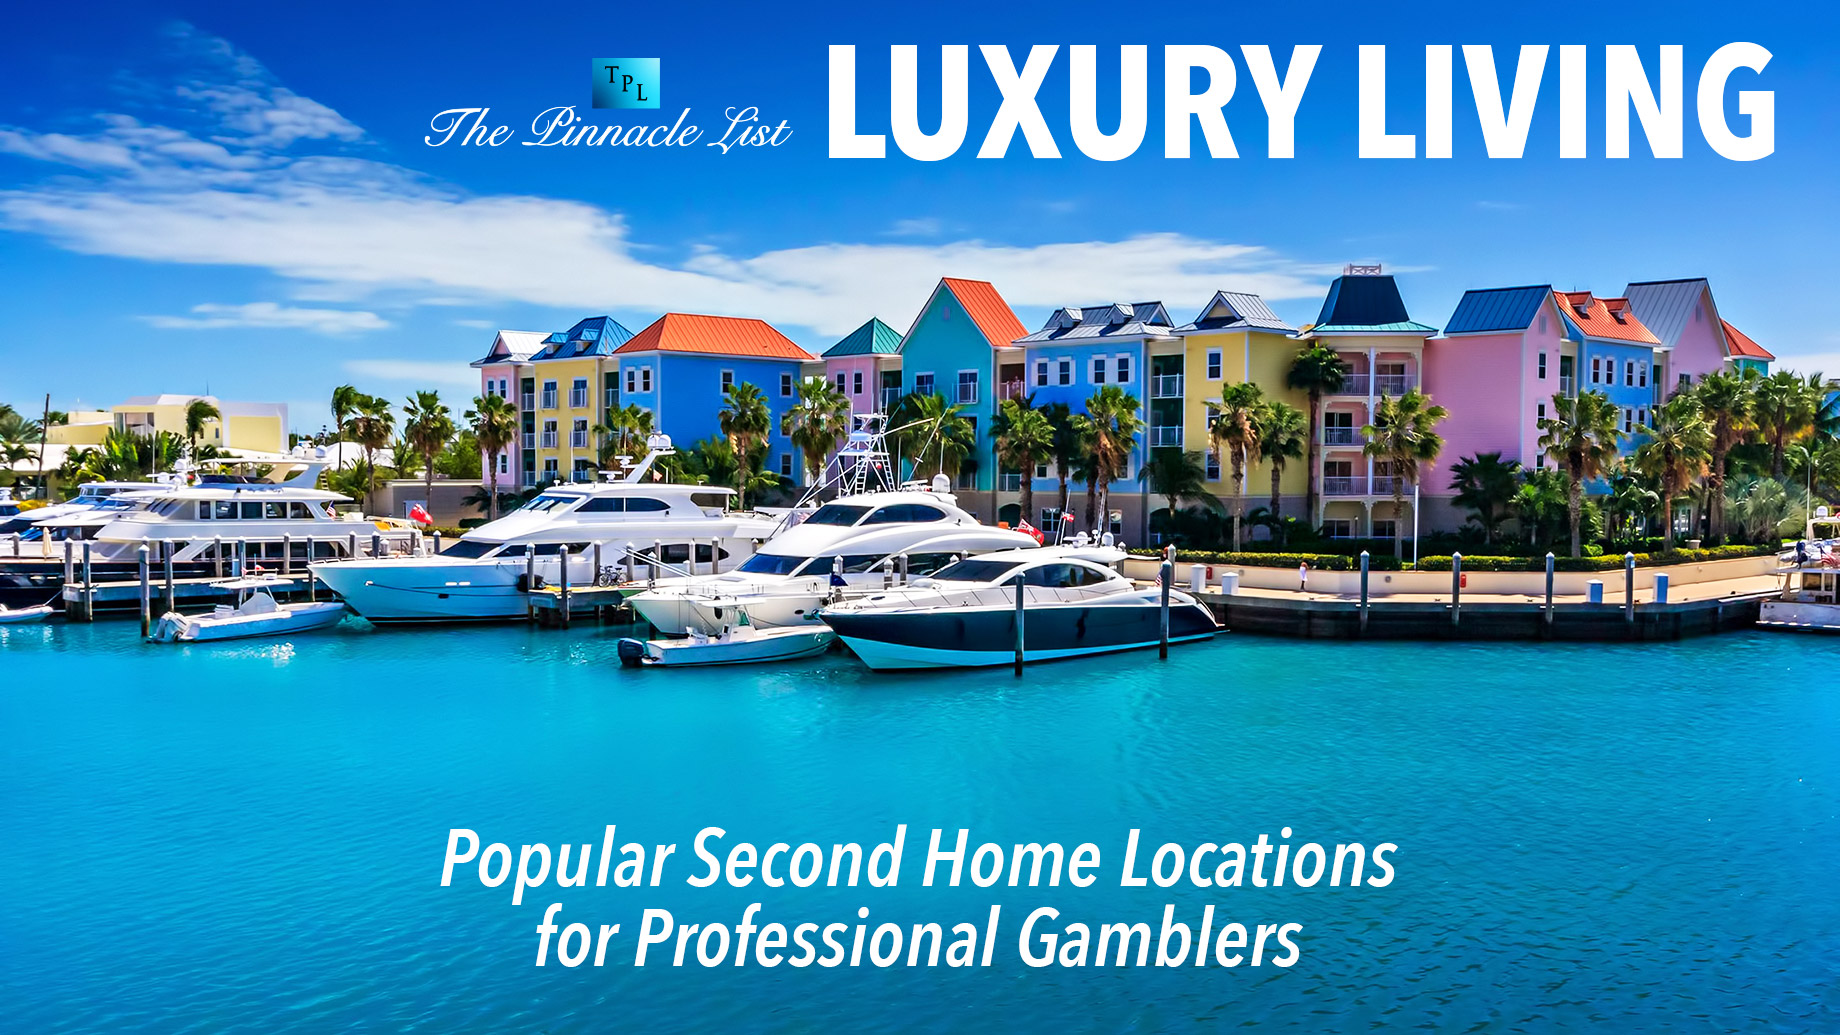 Luxury Living - Popular Second Home Locations for Professional Gamblers